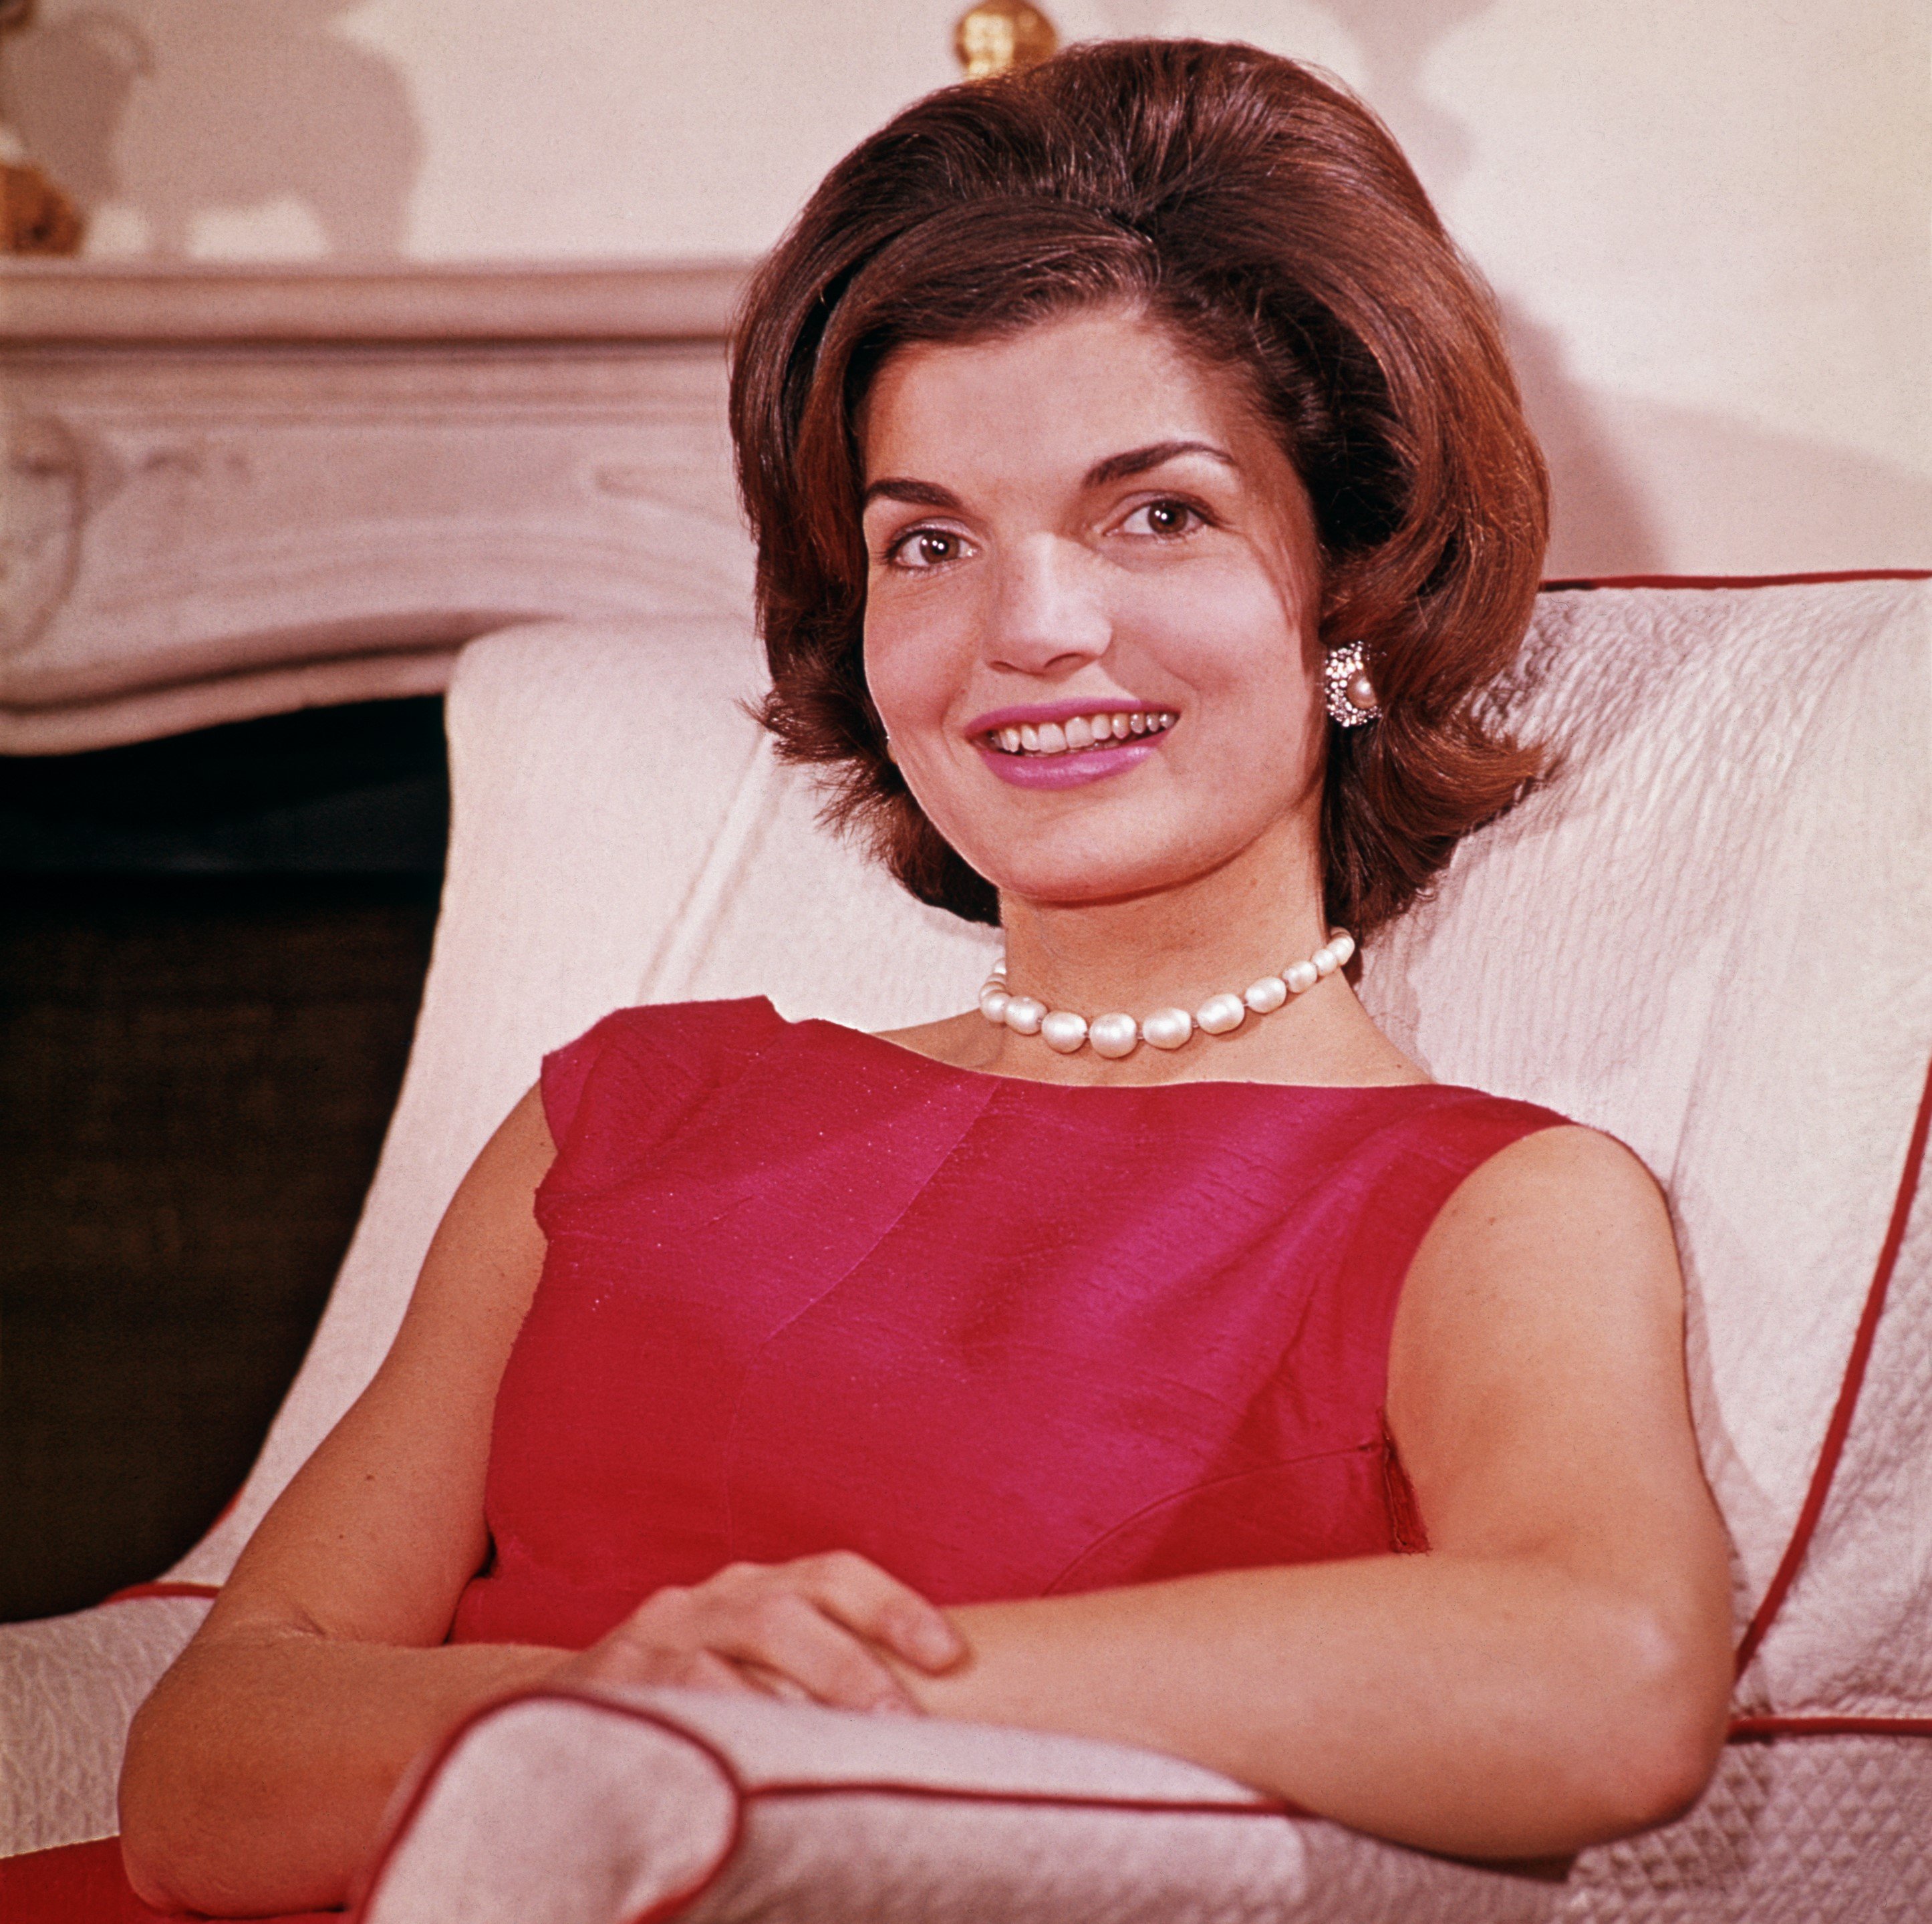 1 Song From The Beatles’ ‘Revolver’ May Be About Jackie Kennedy’s Doctor